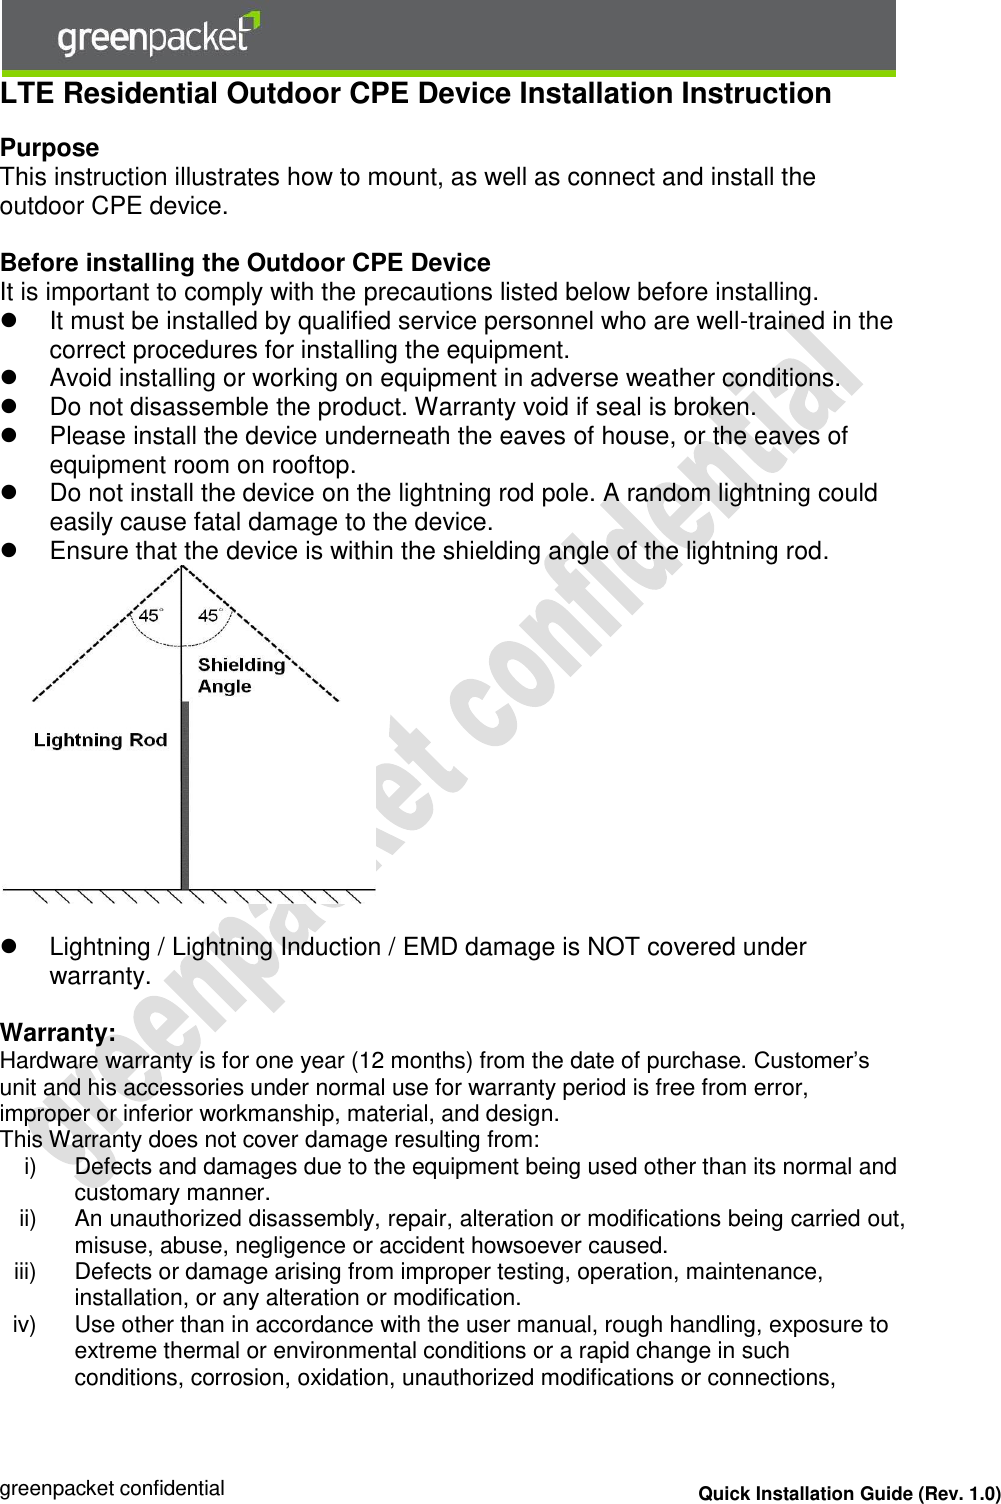  greenpacket confidential Quick Installation Guide (Rev. 1.0) LTE Residential Outdoor CPE Device Installation Instruction  Purpose This instruction illustrates how to mount, as well as connect and install the outdoor CPE device.   Before installing the Outdoor CPE Device It is important to comply with the precautions listed below before installing.   It must be installed by qualified service personnel who are well-trained in the correct procedures for installing the equipment.   Avoid installing or working on equipment in adverse weather conditions.   Do not disassemble the product. Warranty void if seal is broken.   Please install the device underneath the eaves of house, or the eaves of equipment room on rooftop.    Do not install the device on the lightning rod pole. A random lightning could easily cause fatal damage to the device.    Ensure that the device is within the shielding angle of the lightning rod.      Lightning / Lightning Induction / EMD damage is NOT covered under warranty.   Warranty: Hardware warranty is for one year (12 months) from the date of purchase. Customer’s unit and his accessories under normal use for warranty period is free from error, improper or inferior workmanship, material, and design. This Warranty does not cover damage resulting from: i)  Defects and damages due to the equipment being used other than its normal and customary manner. ii)  An unauthorized disassembly, repair, alteration or modifications being carried out, misuse, abuse, negligence or accident howsoever caused. iii)  Defects or damage arising from improper testing, operation, maintenance, installation, or any alteration or modification. iv)  Use other than in accordance with the user manual, rough handling, exposure to extreme thermal or environmental conditions or a rapid change in such conditions, corrosion, oxidation, unauthorized modifications or connections, 